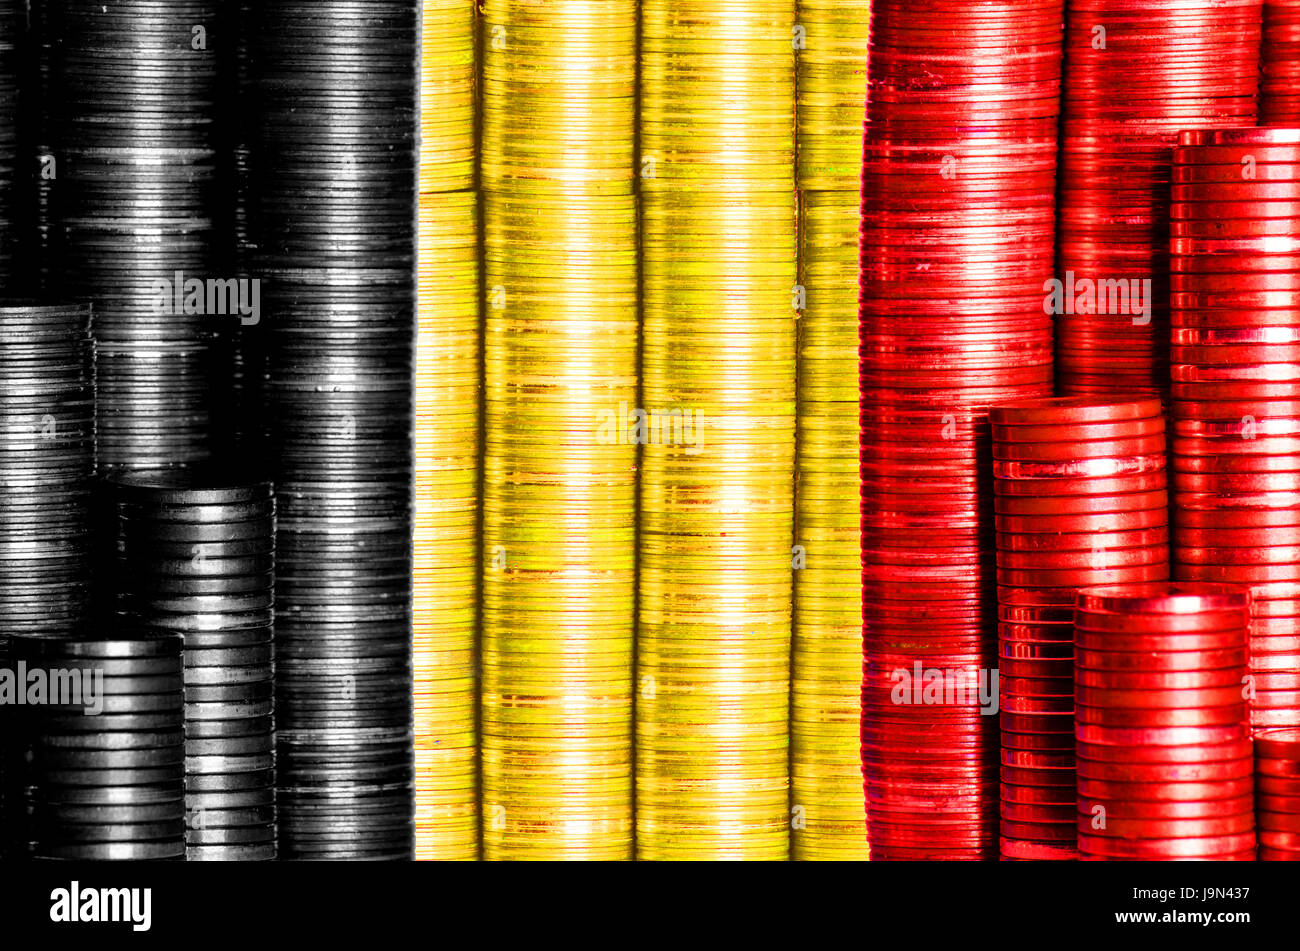 belgian money flag constucted from stacks of coins Stock Photo